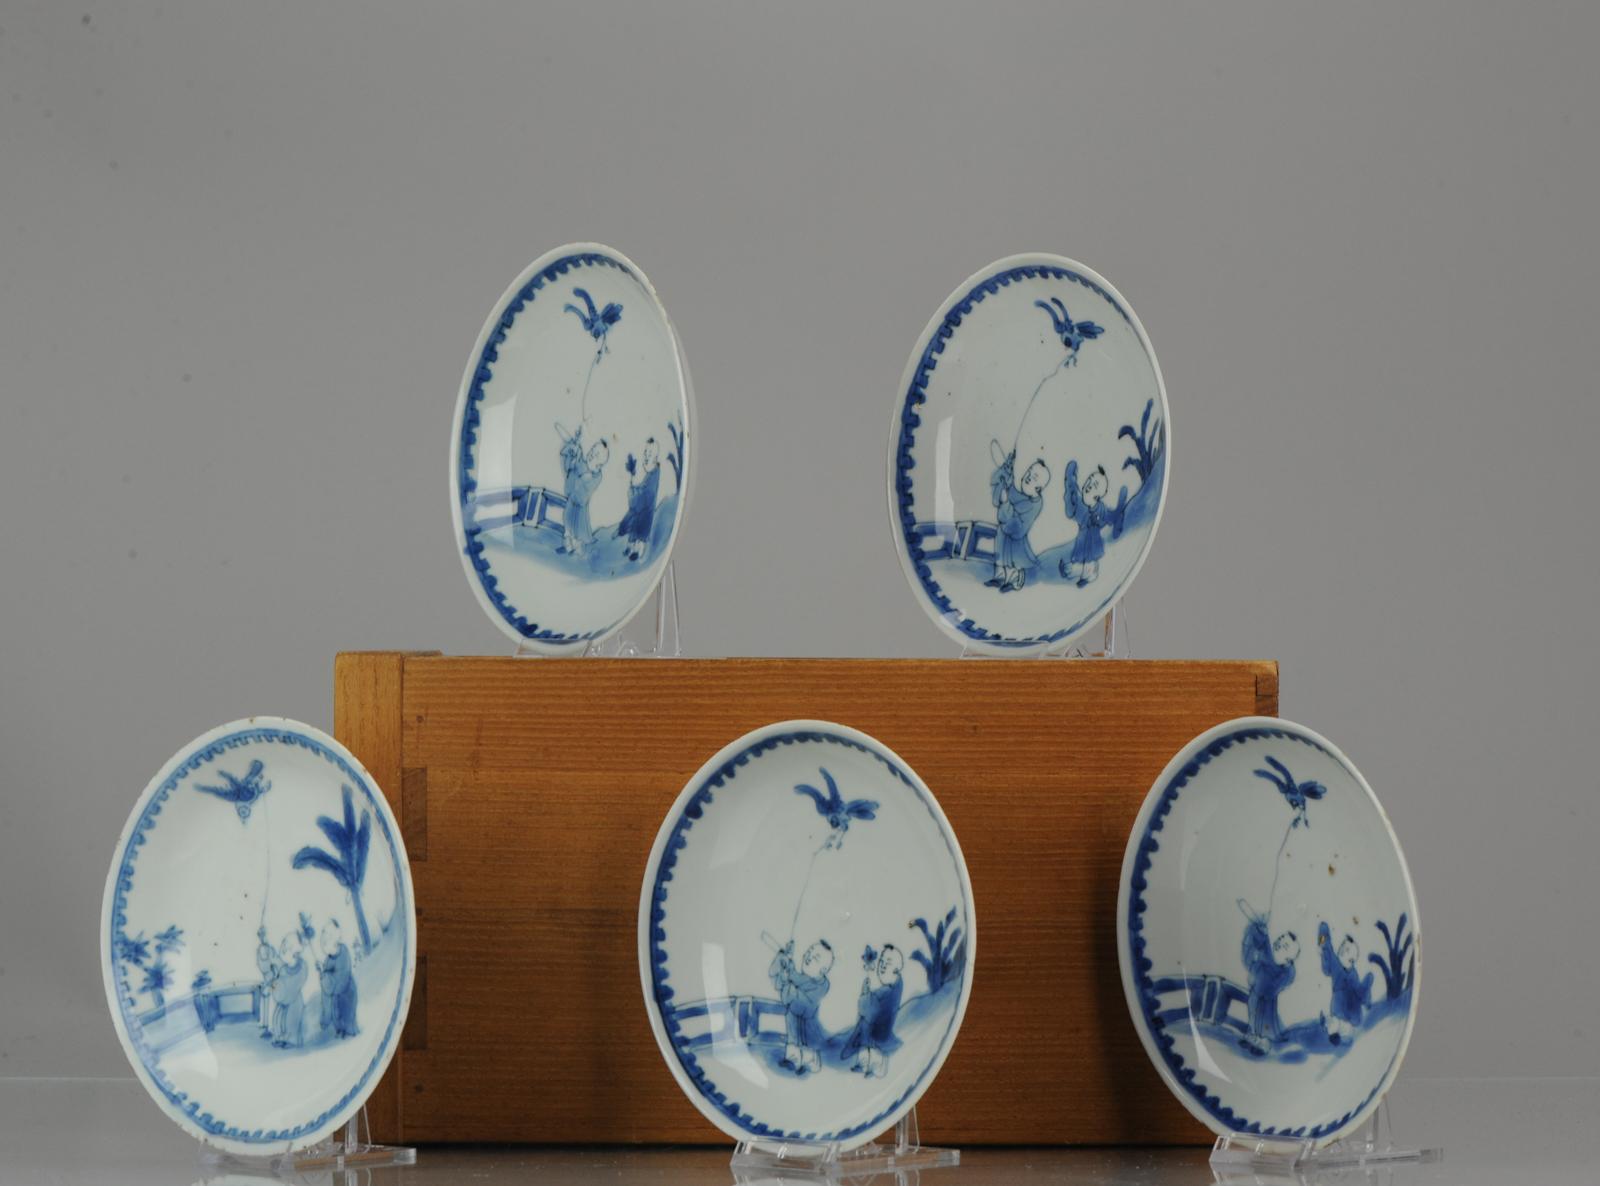 A very nicely decorated set of 5 late ming blue and white porcelain dishes, Tianqi or Chongzhen Period c.1620-1635. Box included

These small Transitional porcelain saucer-shaped dishes would have been used for the Japanese tea ceremony meal, the